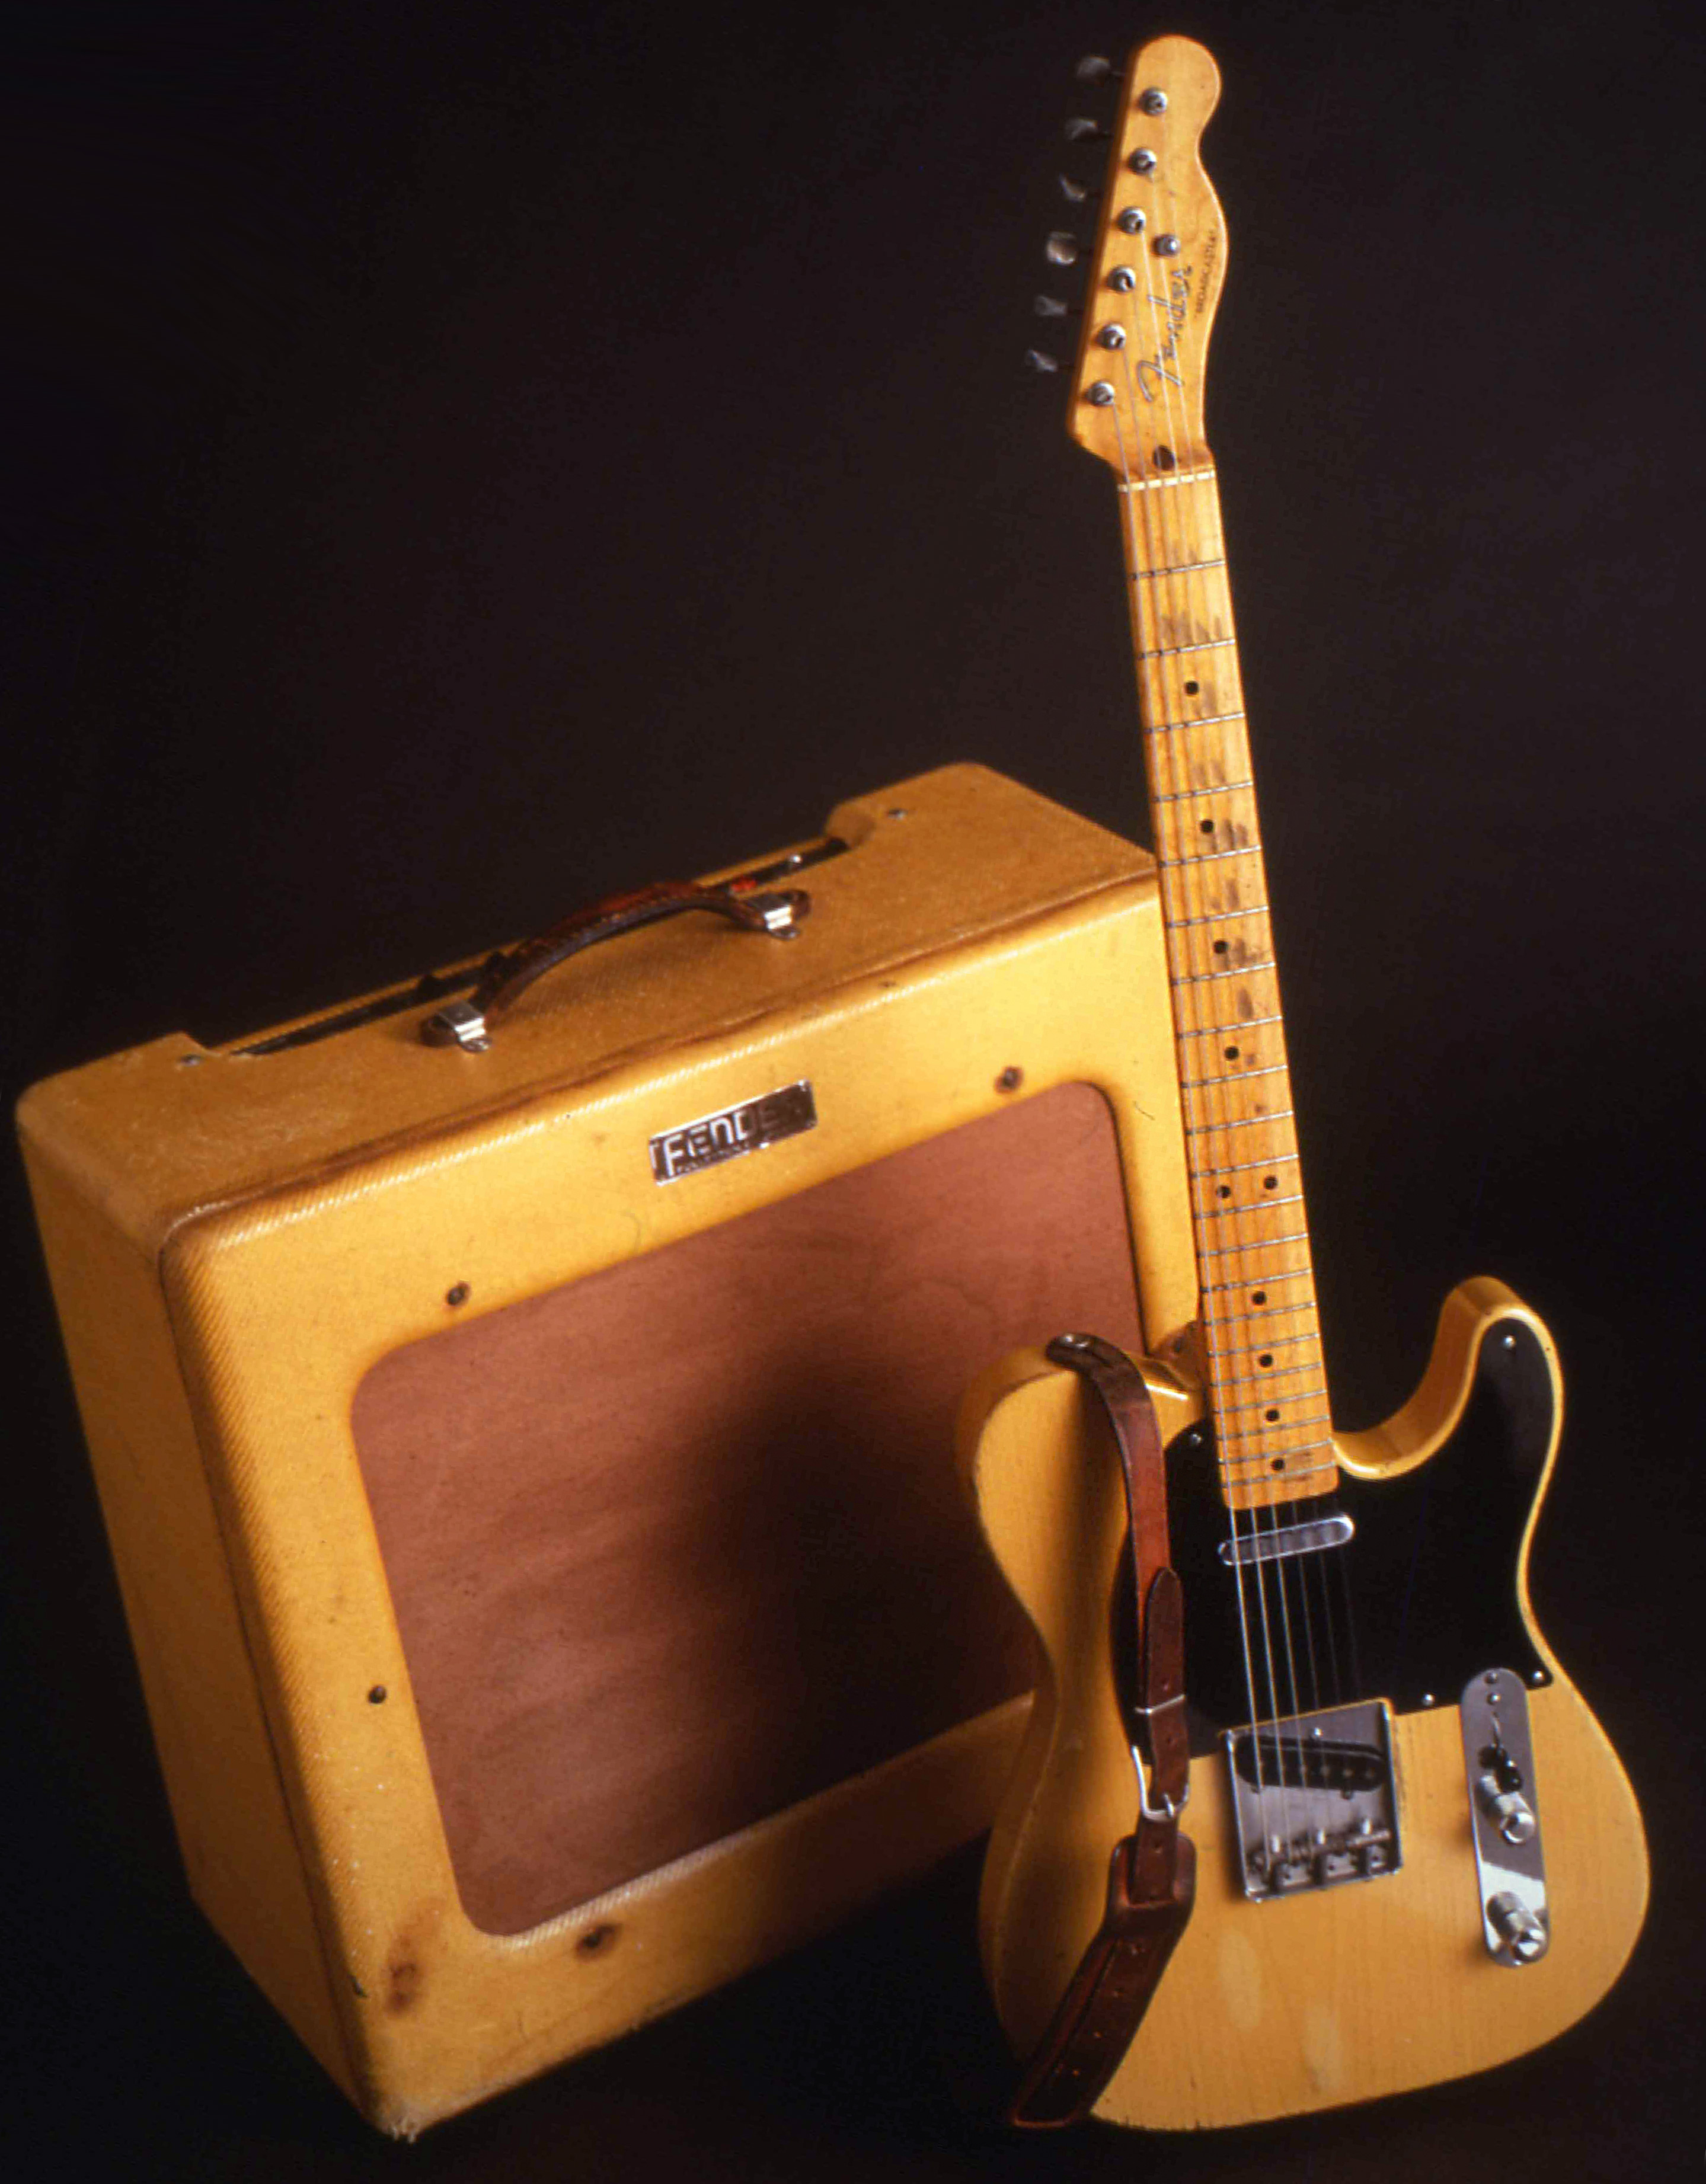 Image of Fender Broadcaster Guitar and Amplifier